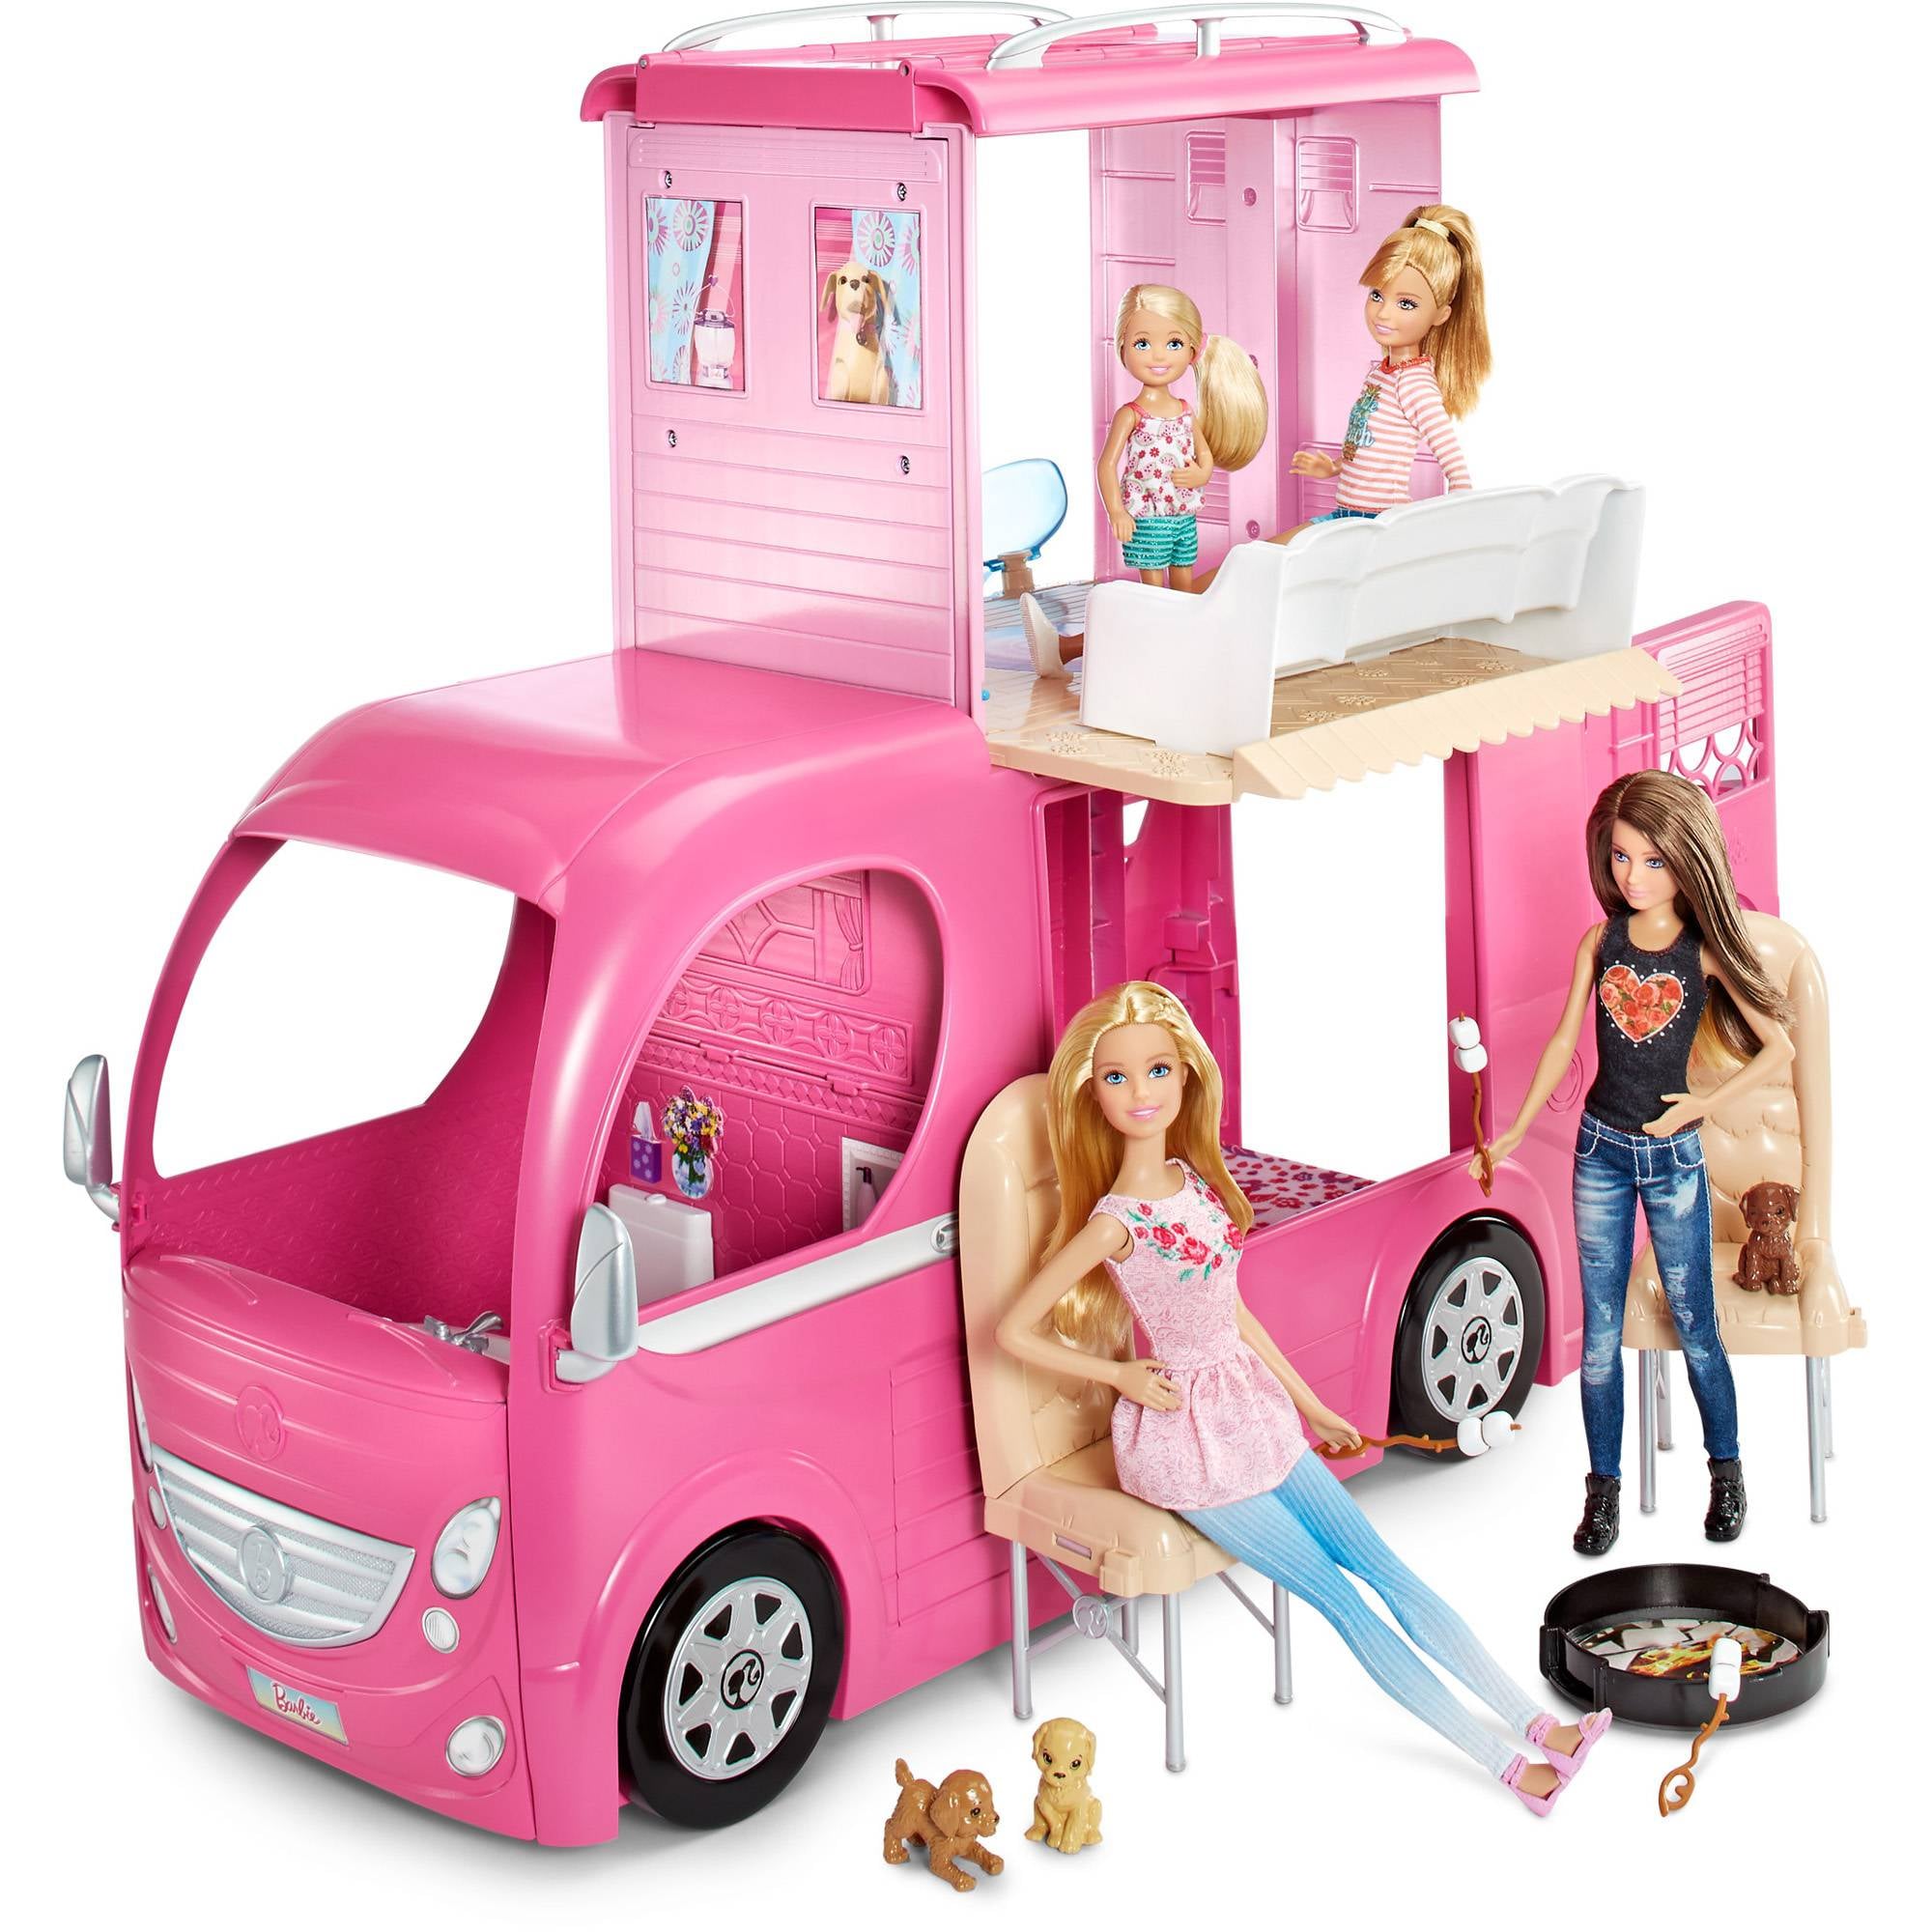 barbie ken dress up and go closet and vehicle giftset